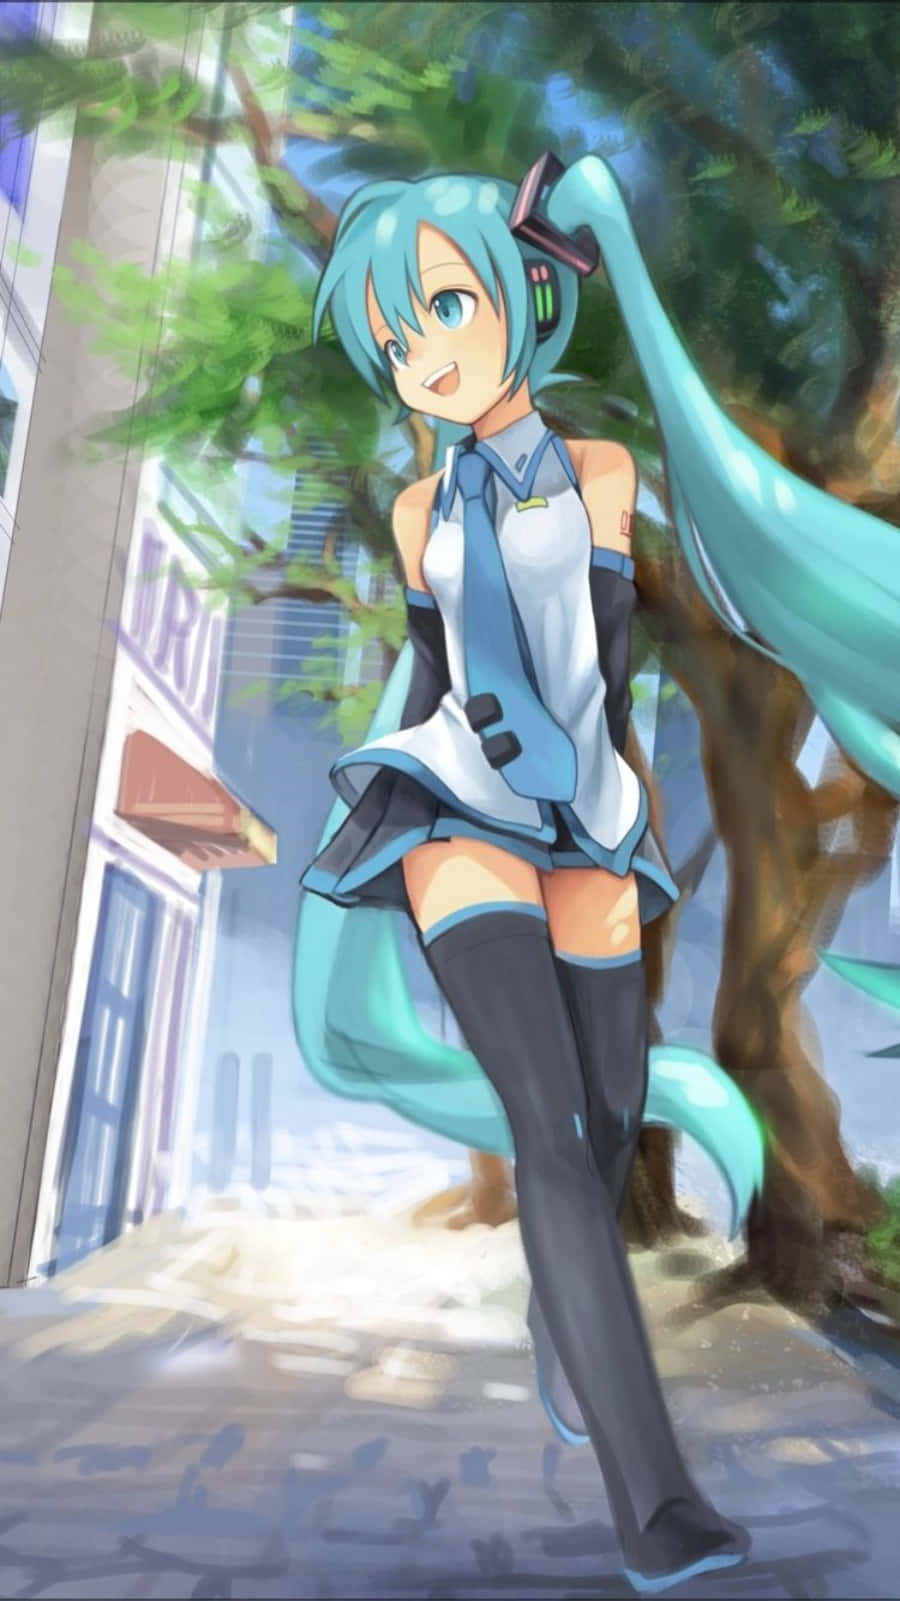 Play your favorite music with your Hatsune Miku Phone Wallpaper